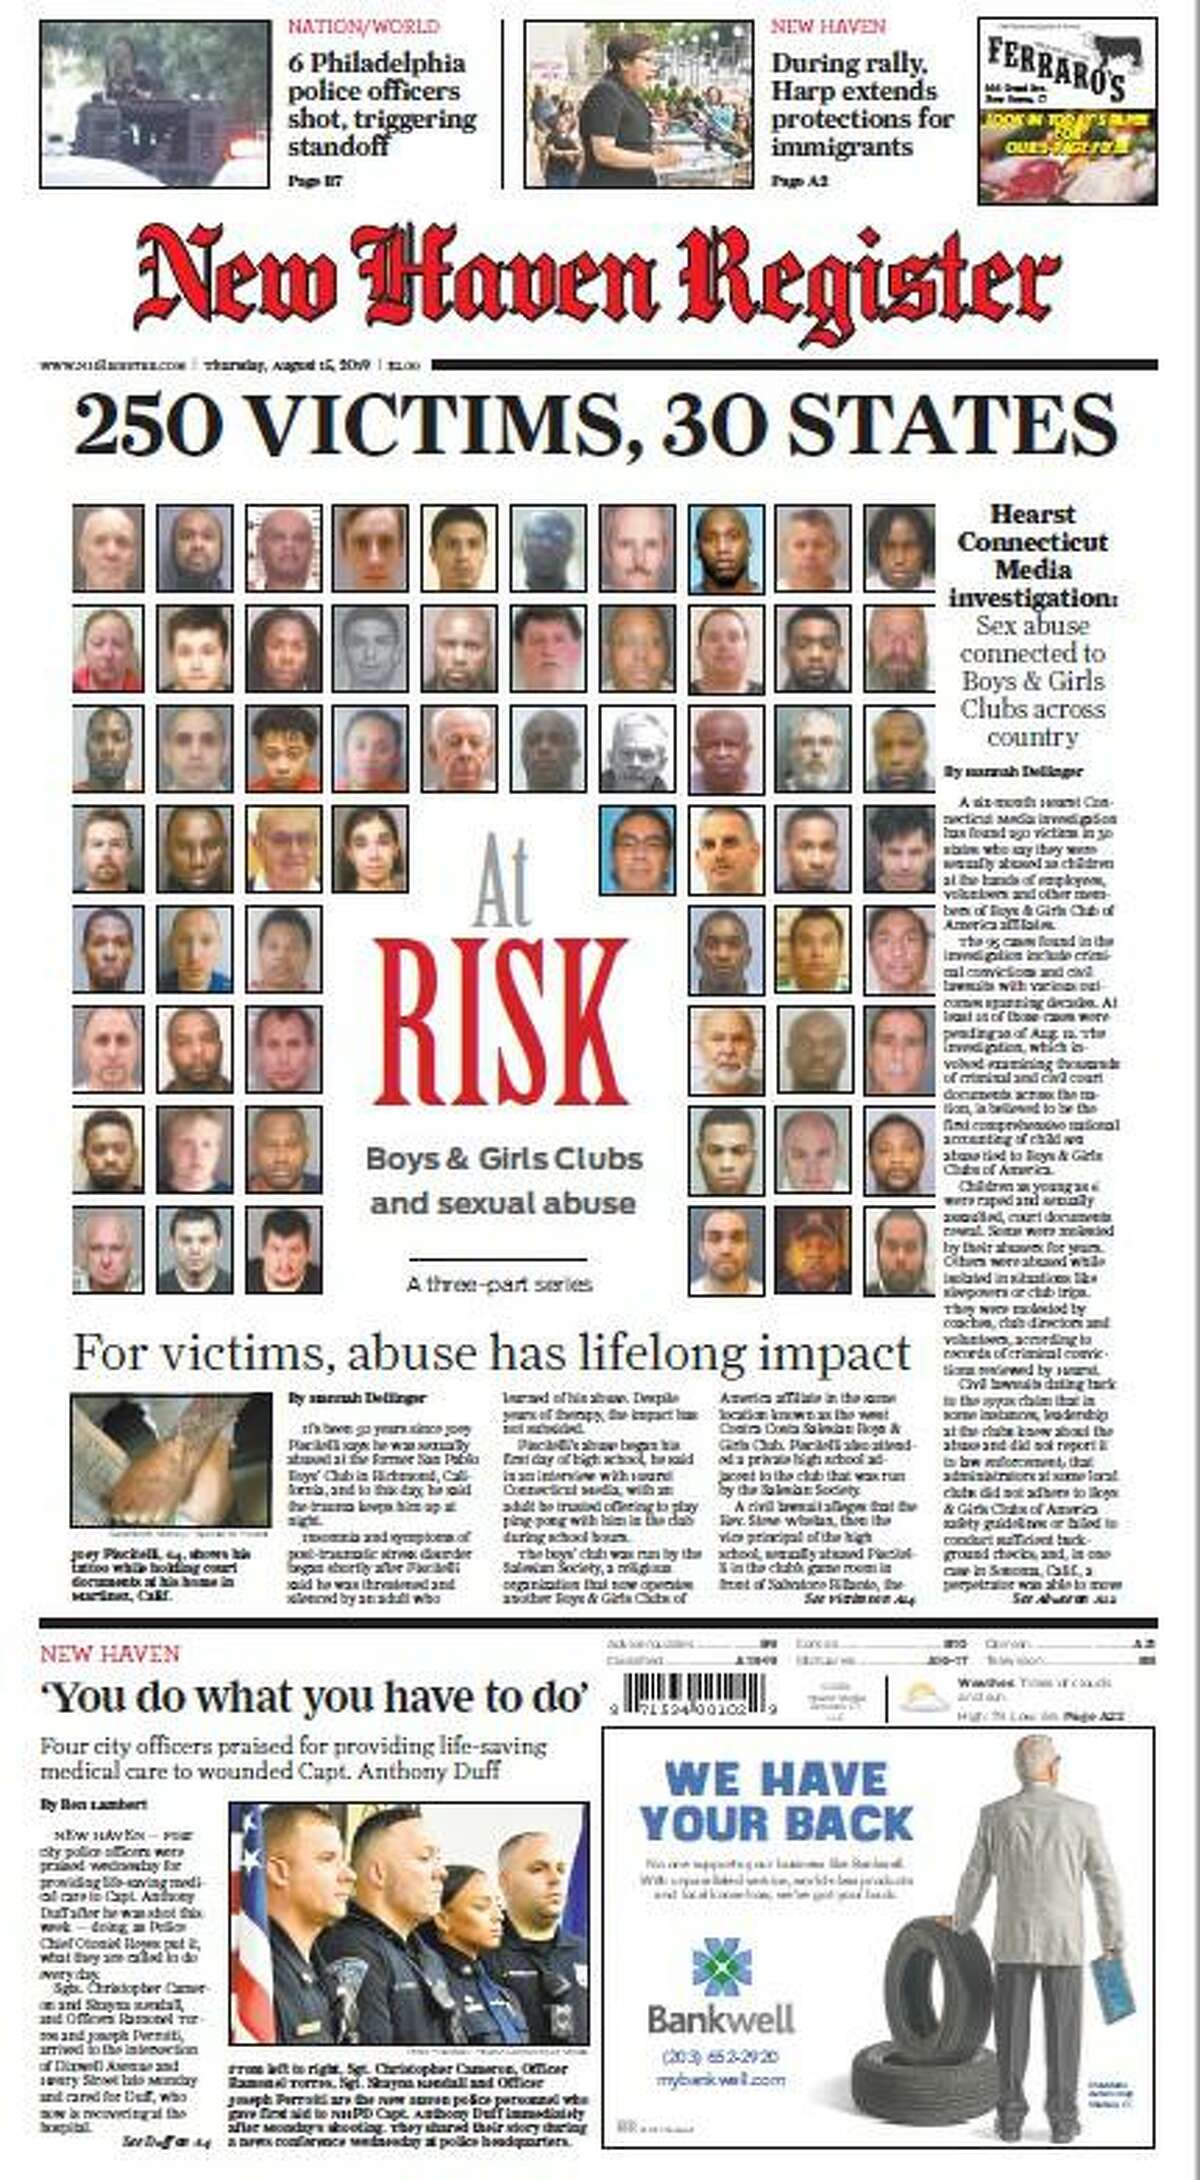 One of our front pages for Day 1 of the At Risk: Boys & Girls Clubs and sexual abuse project.